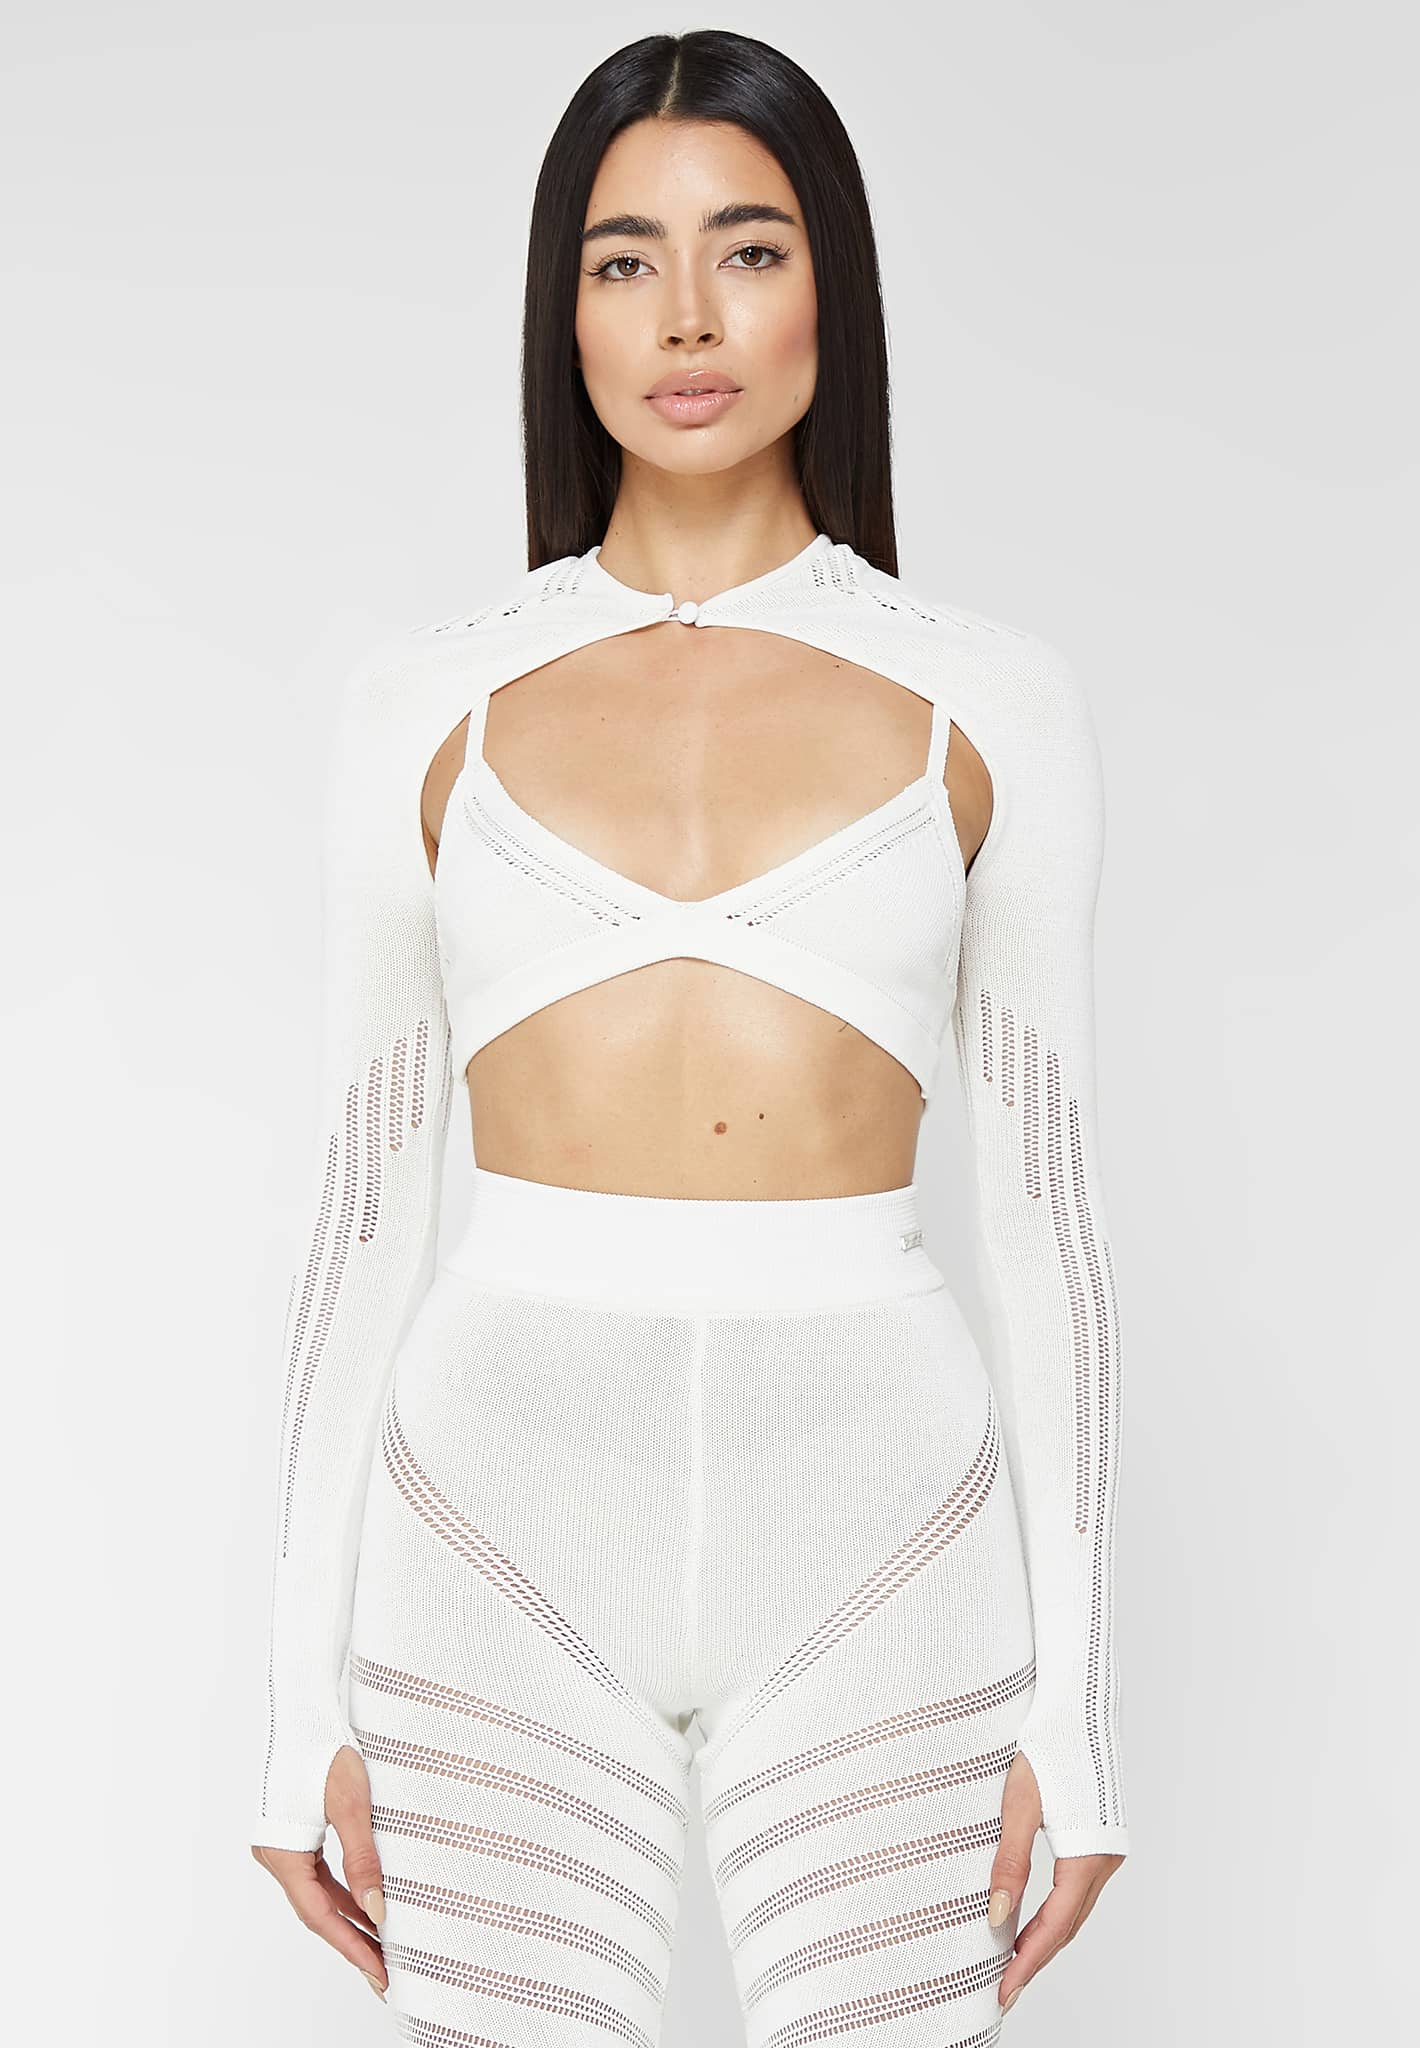 Knitted Sleeve Overlay with Bralette - White